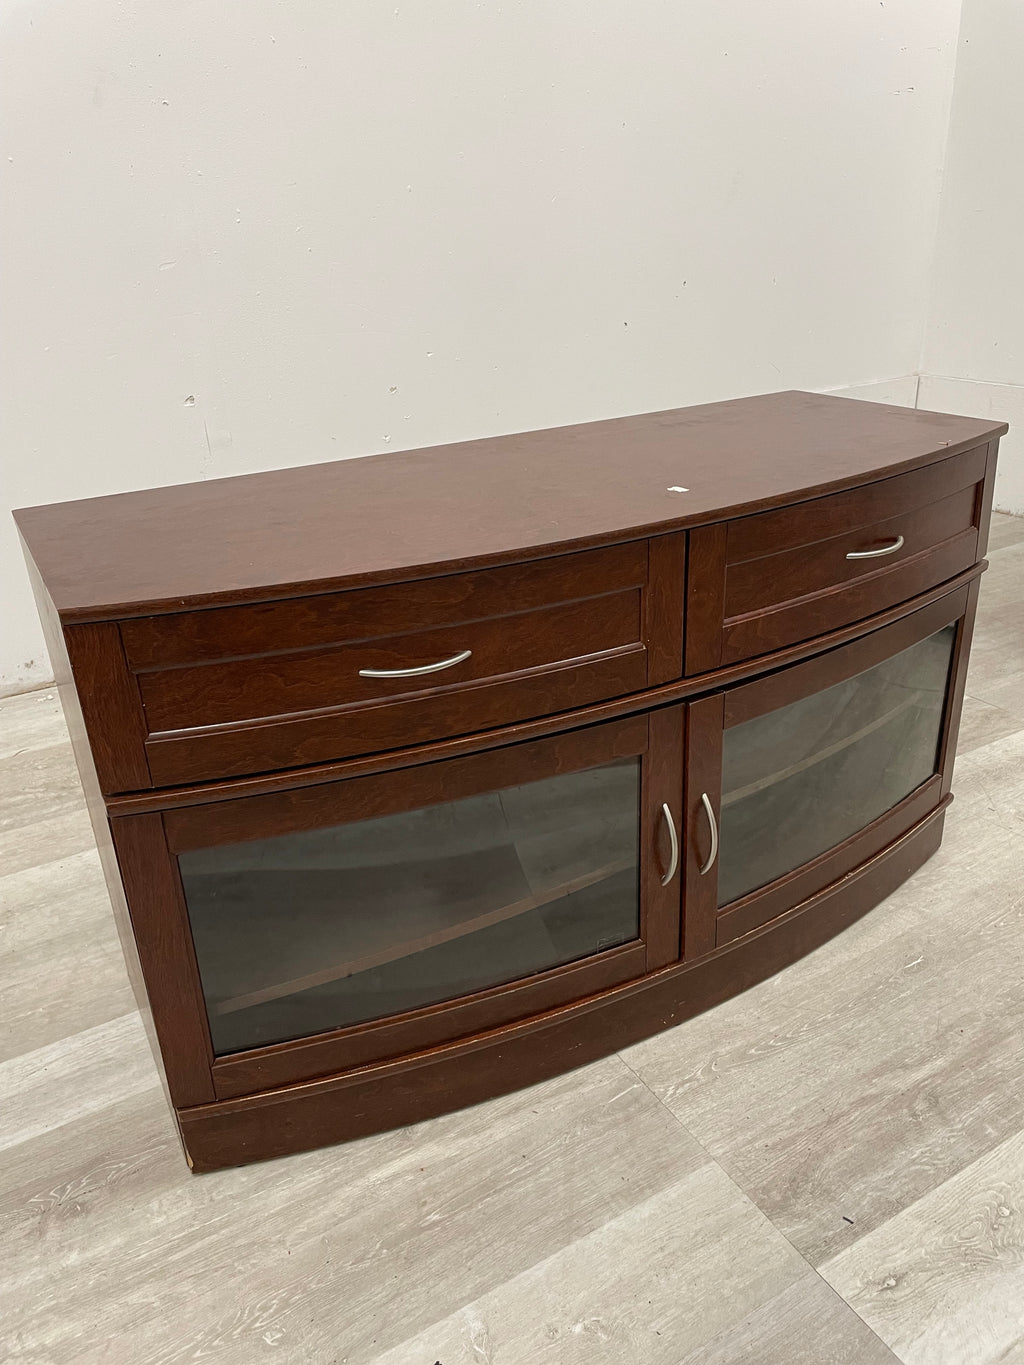 Solid Wood Unit With Lower Glass Cabinets